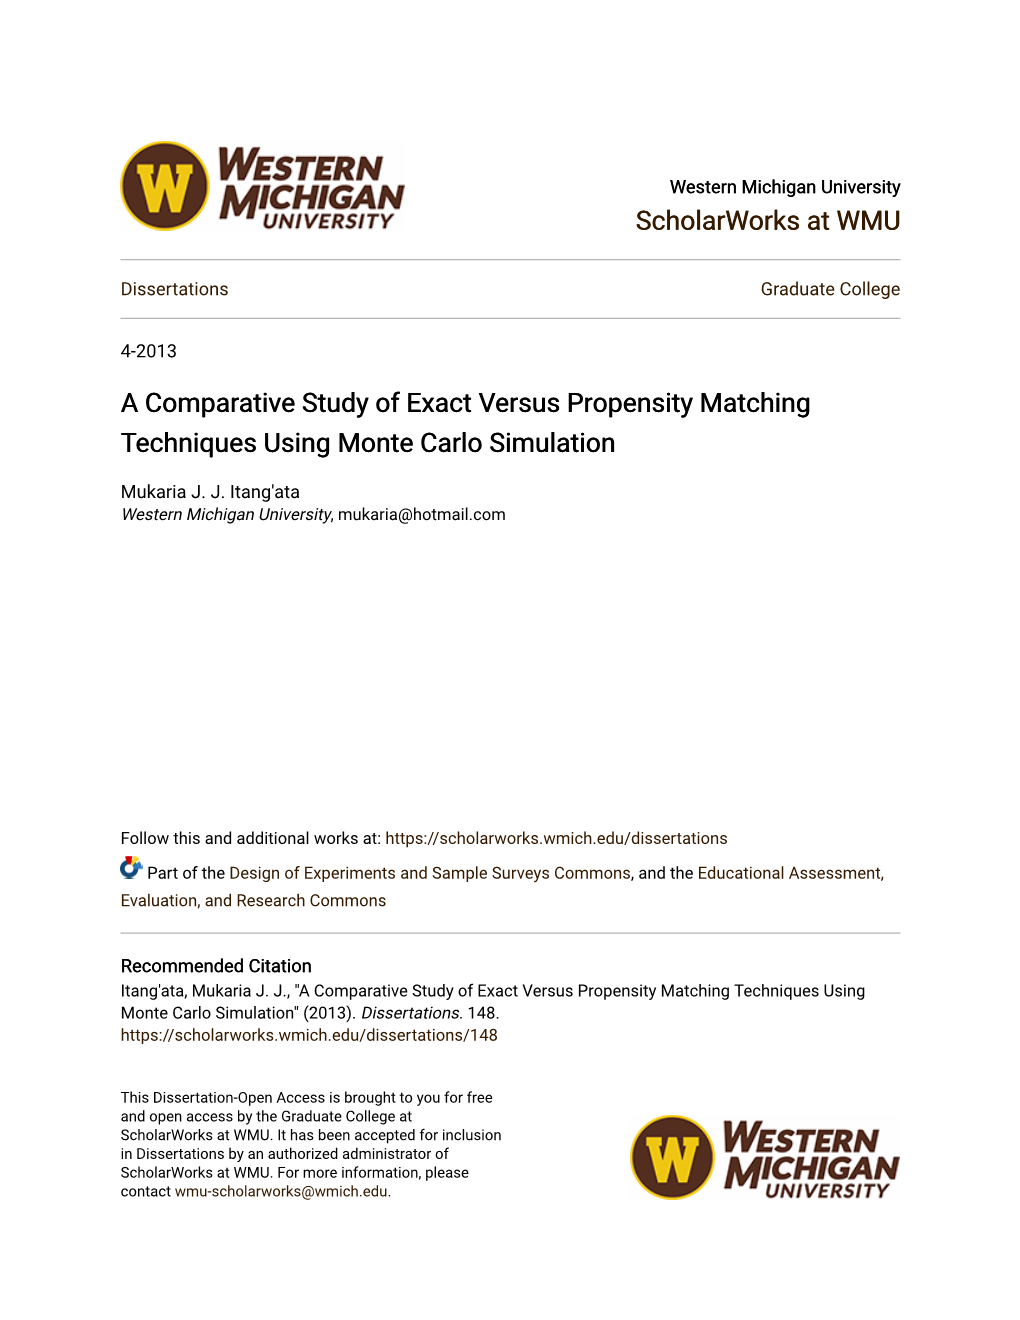 A Comparative Study of Exact Versus Propensity Matching Techniques Using Monte Carlo Simulation